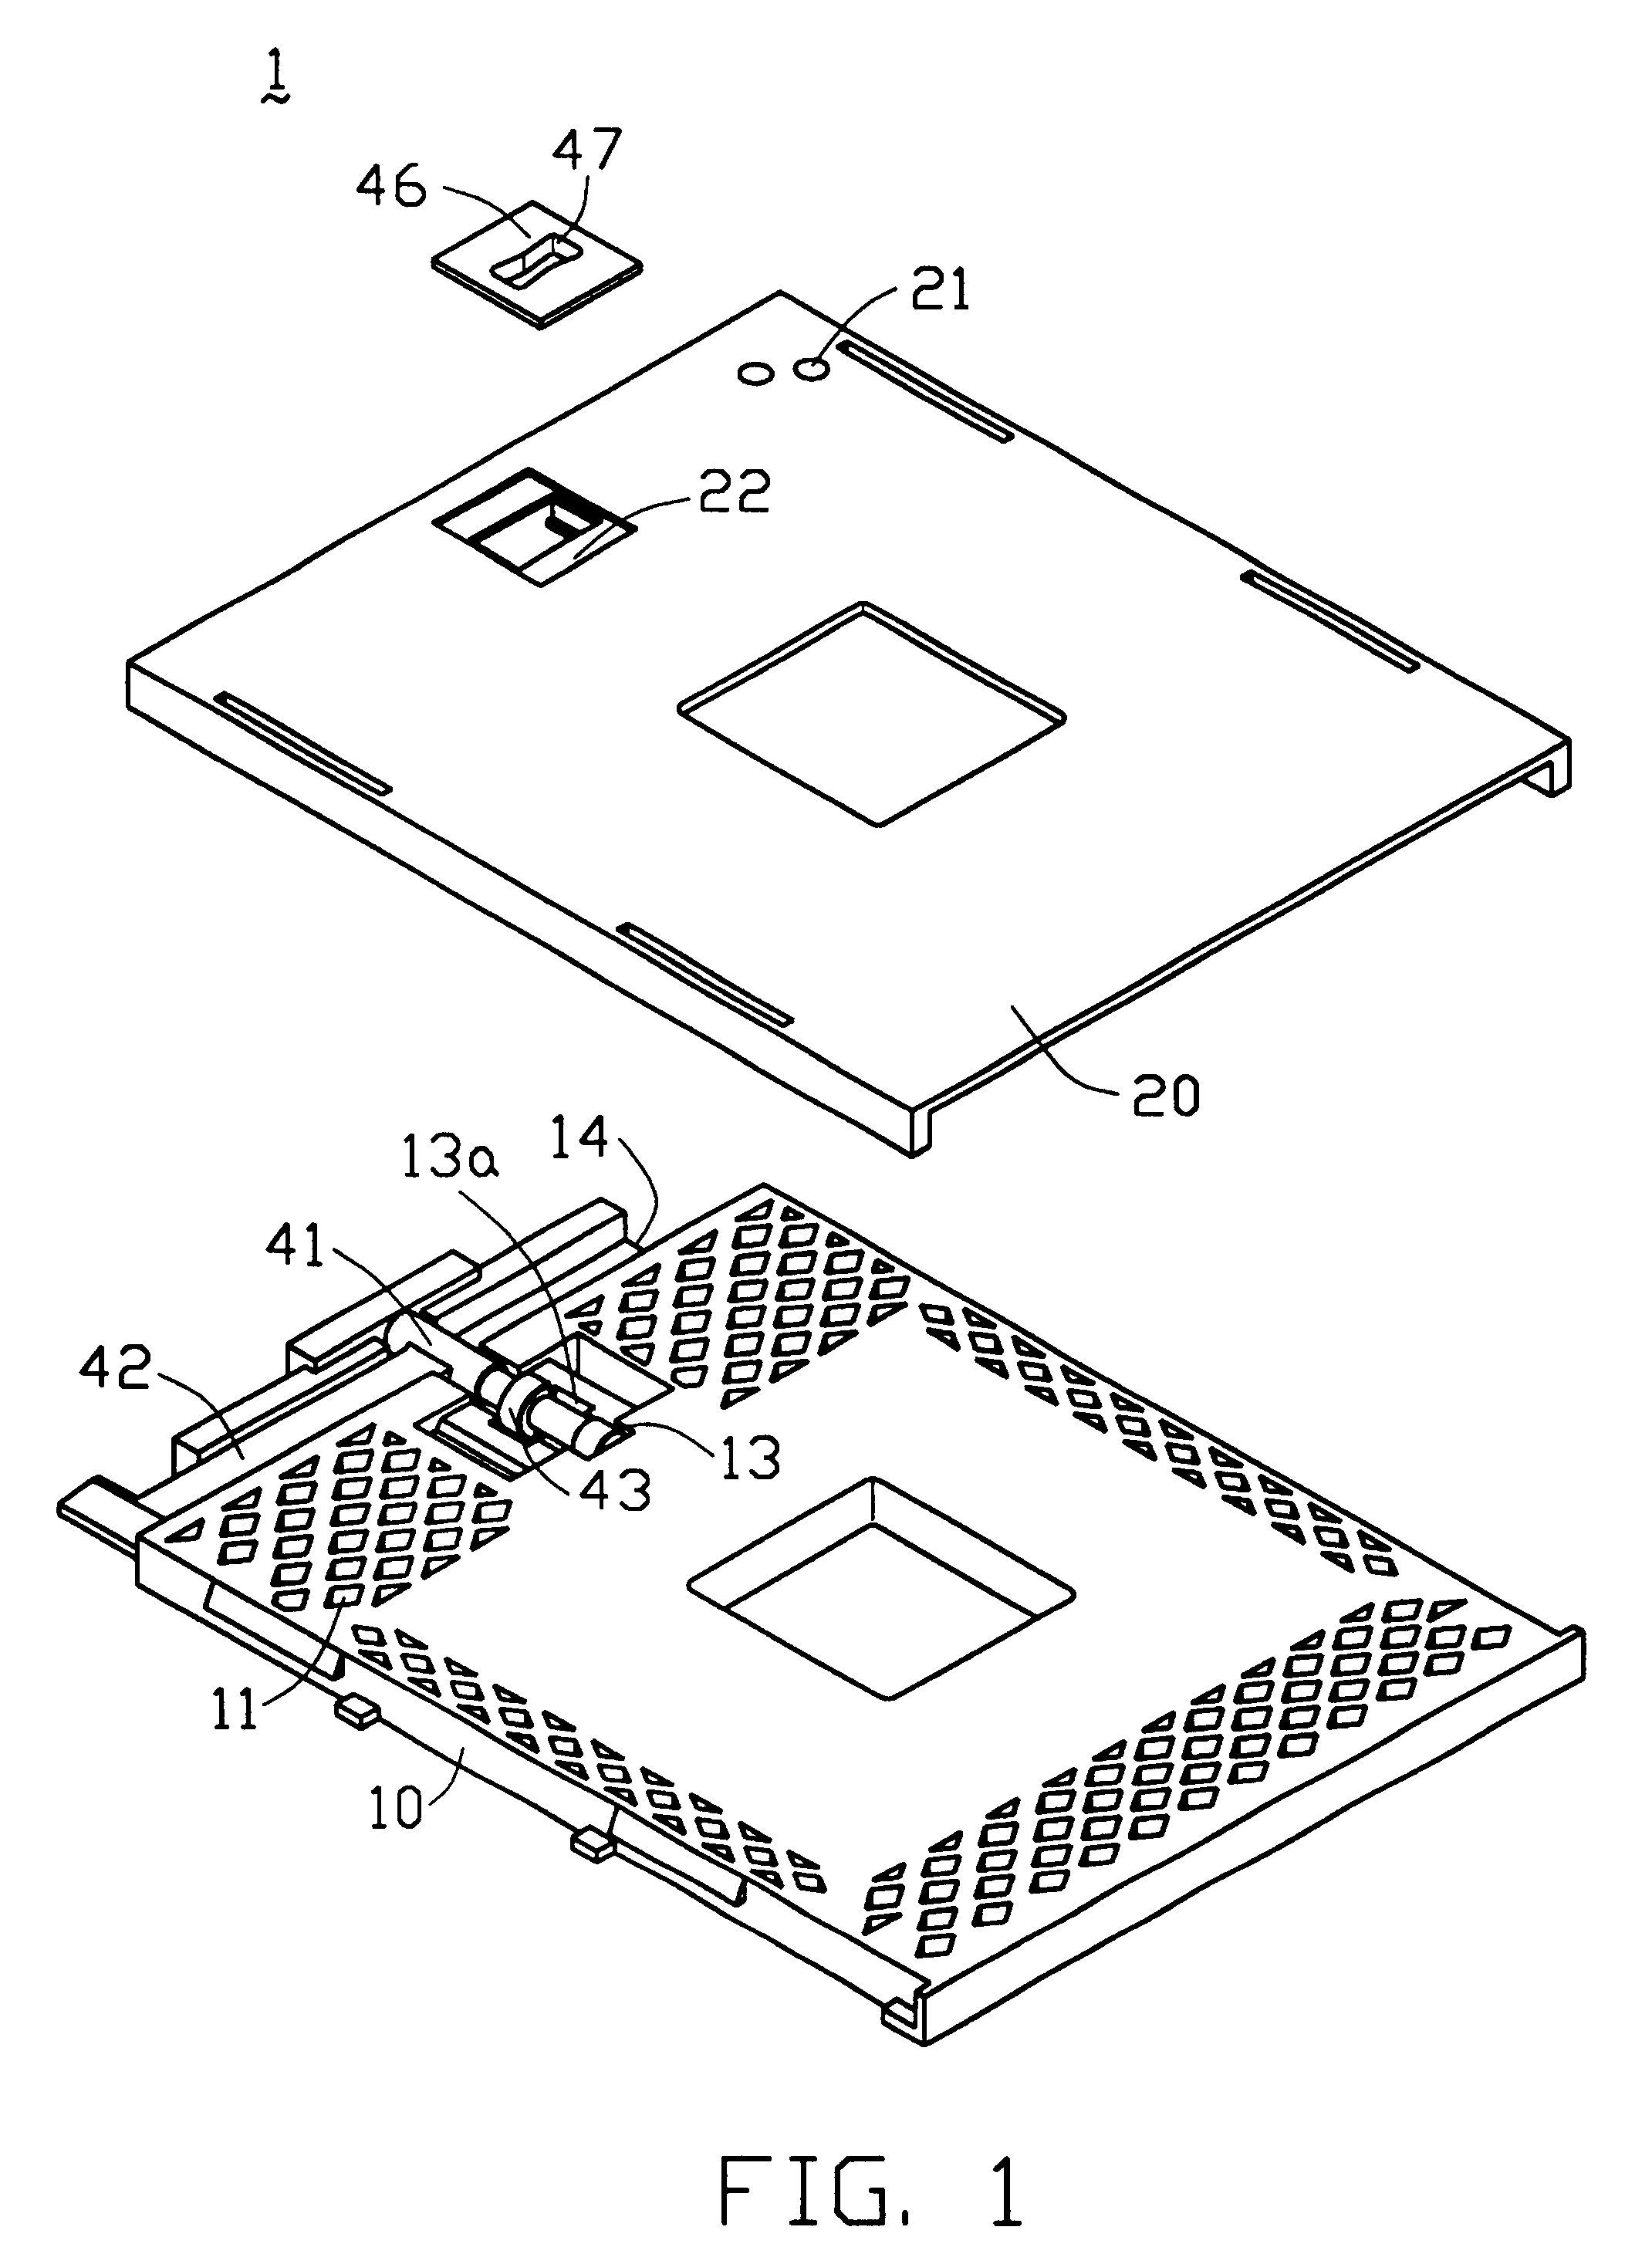 Zero insertion force connector socket with helical driving mechanism